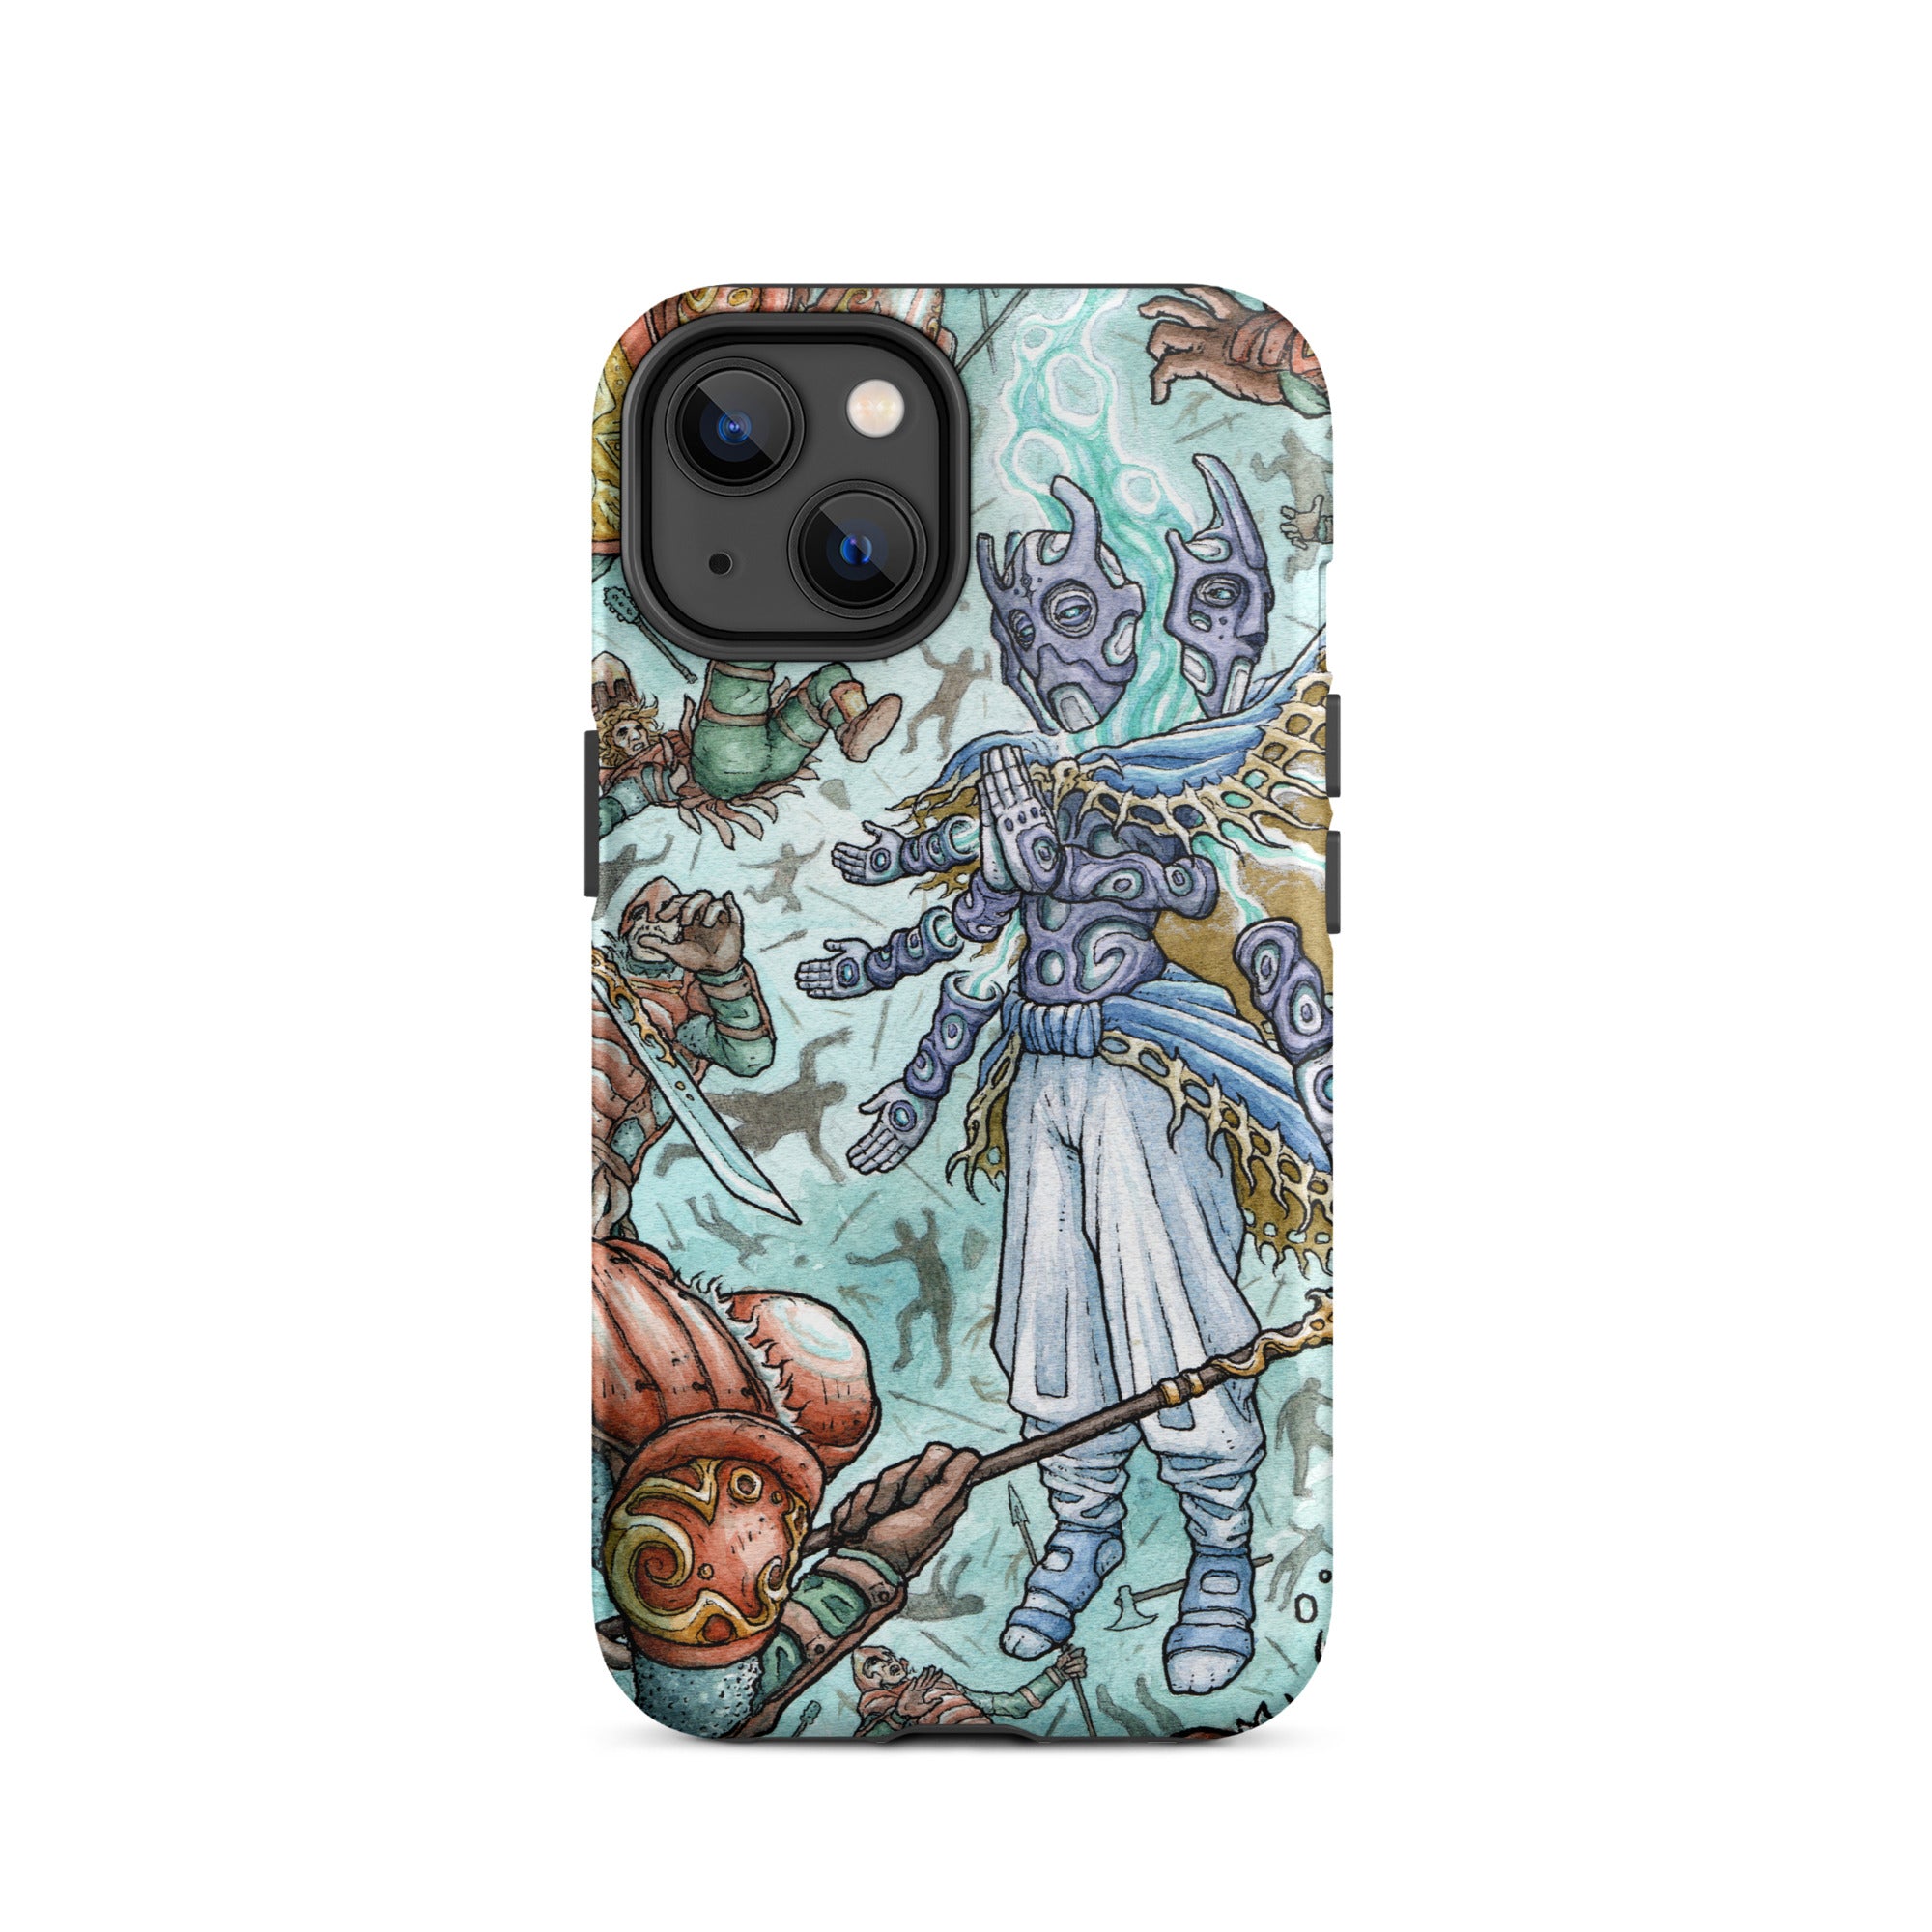 Tough iPhone Case - Annihilation Of The Imperial Army